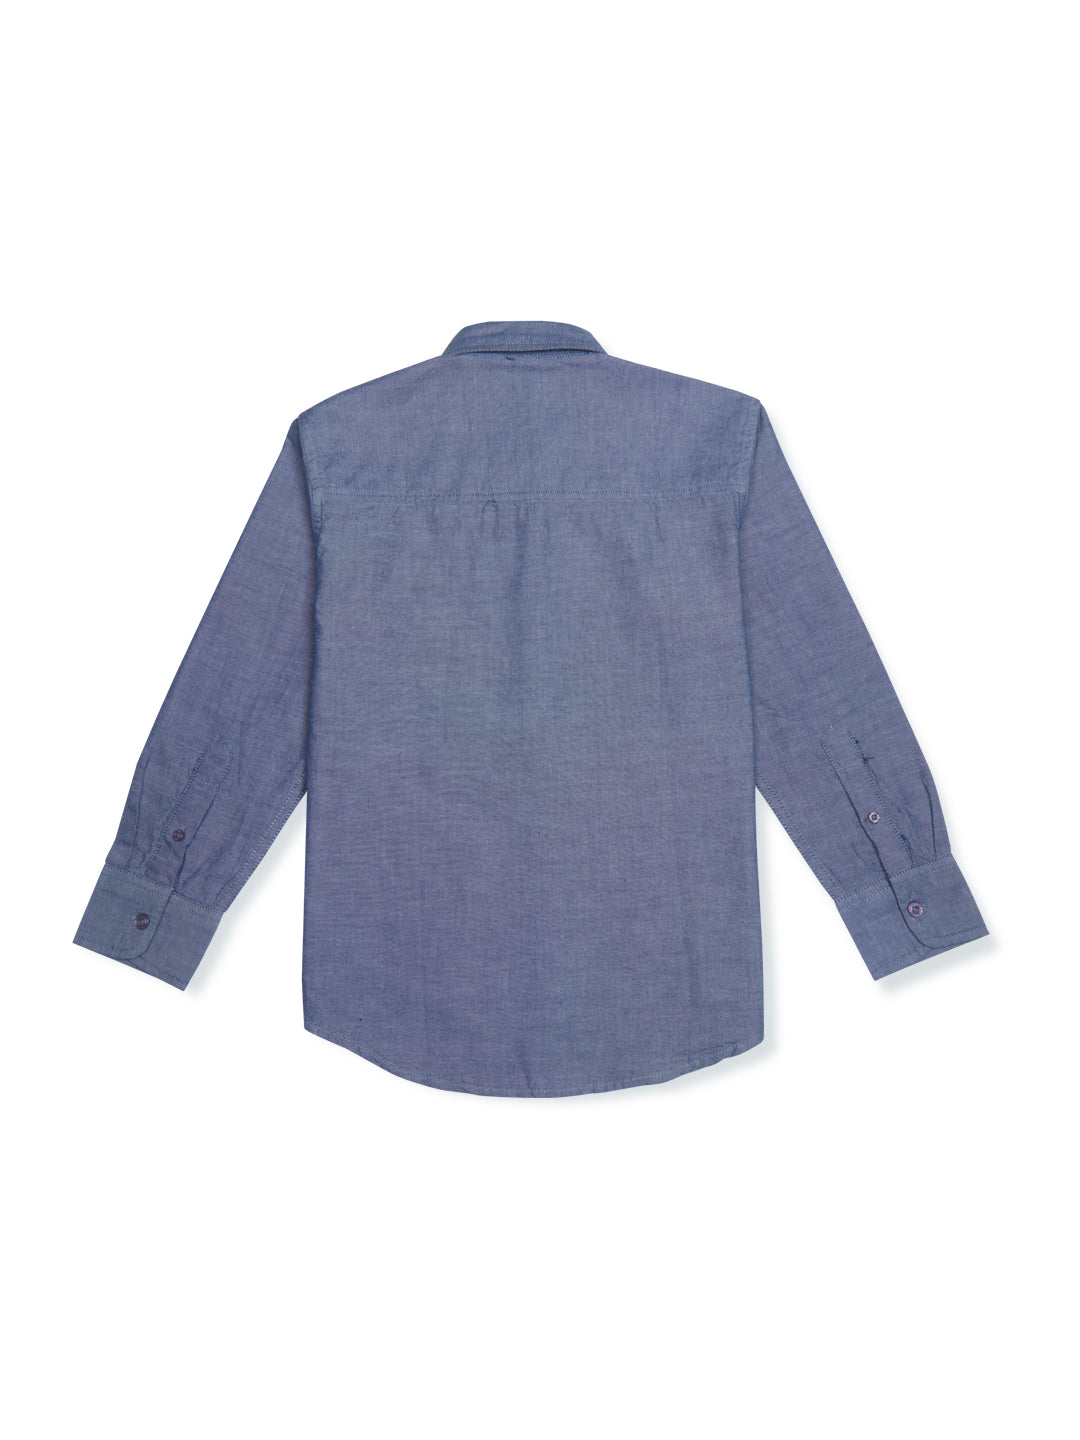 Boys Blue Woven Solid Full Sleeves Shirt